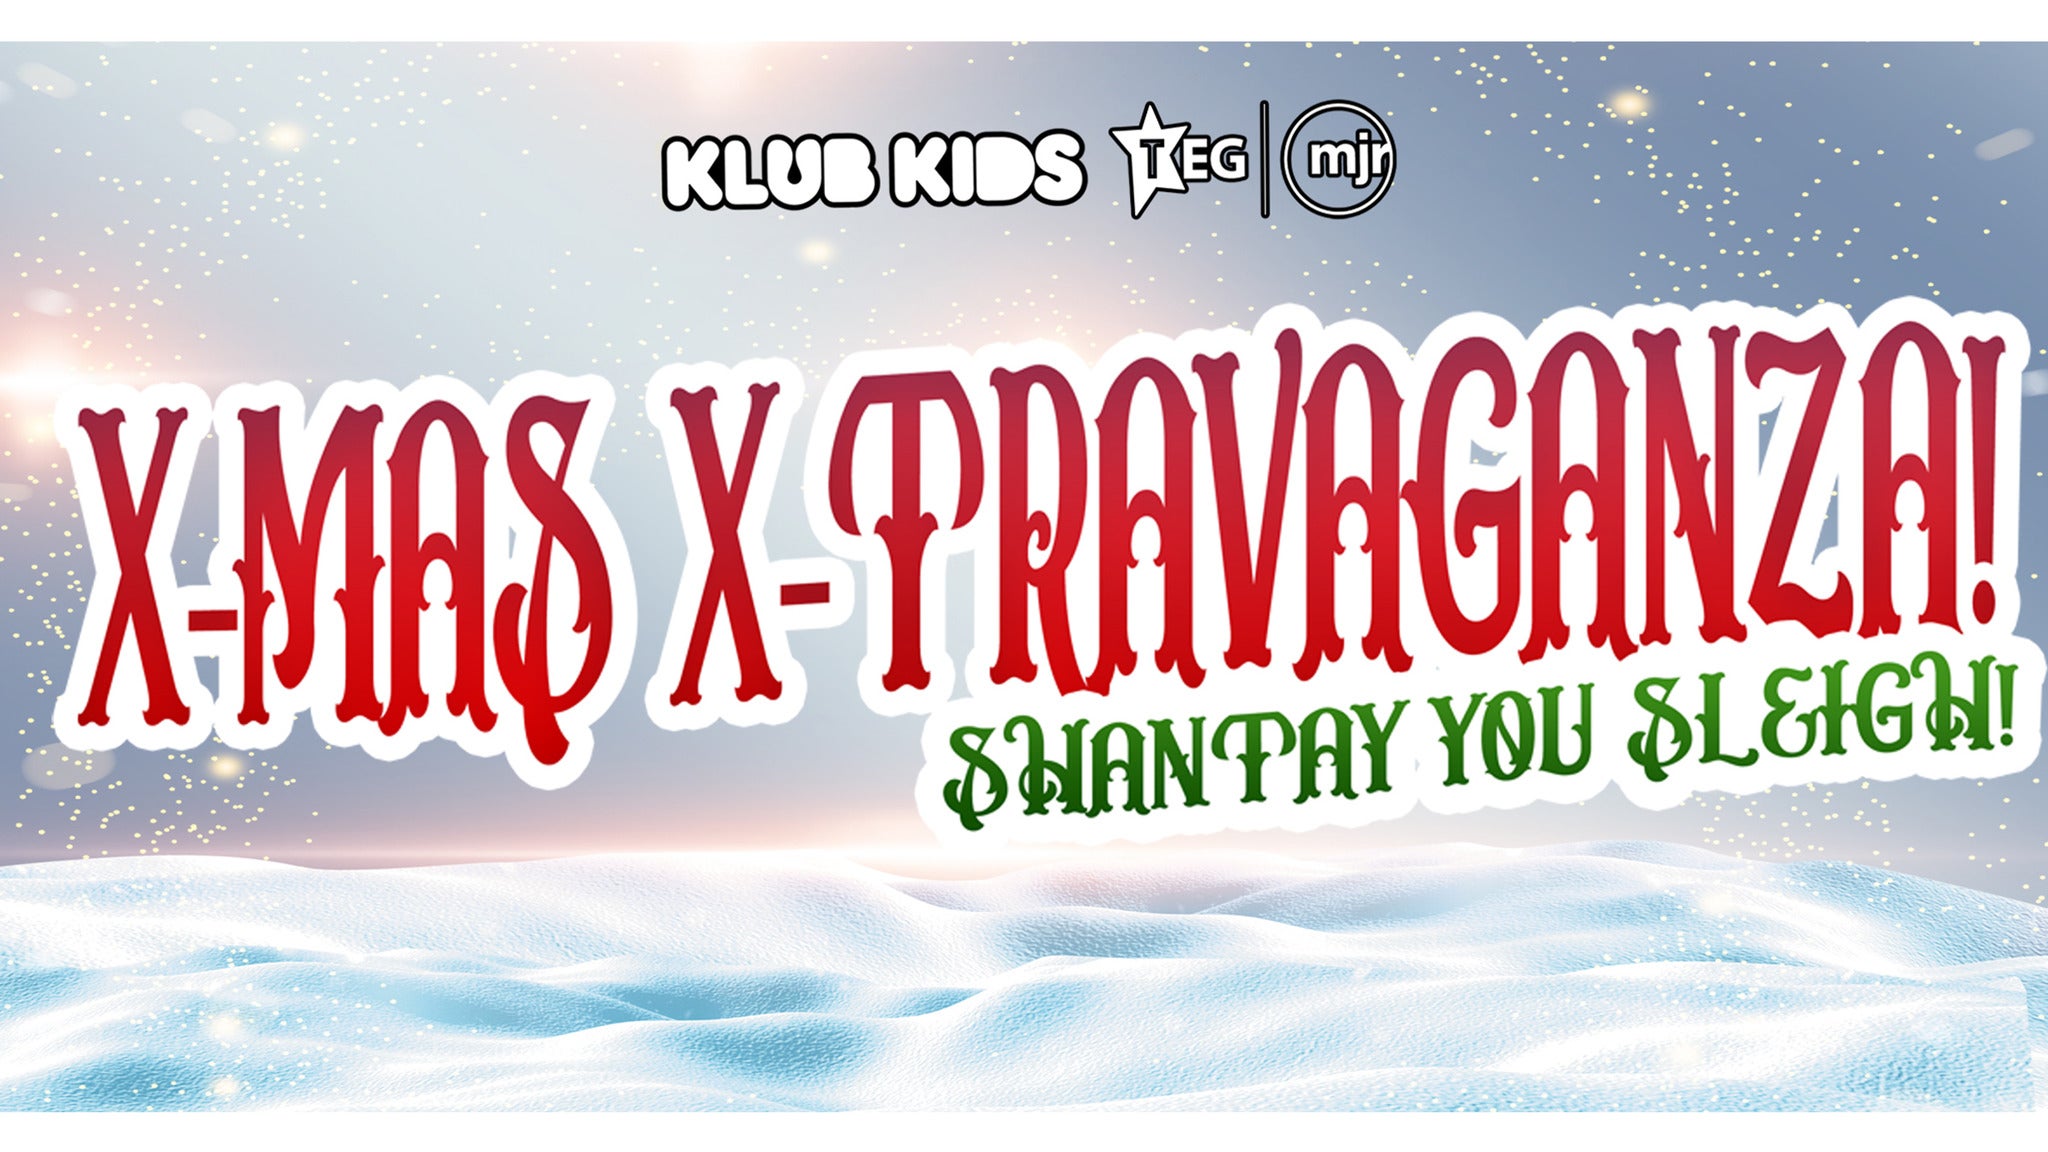 The Xmas Xtravaganza Event Title Pic